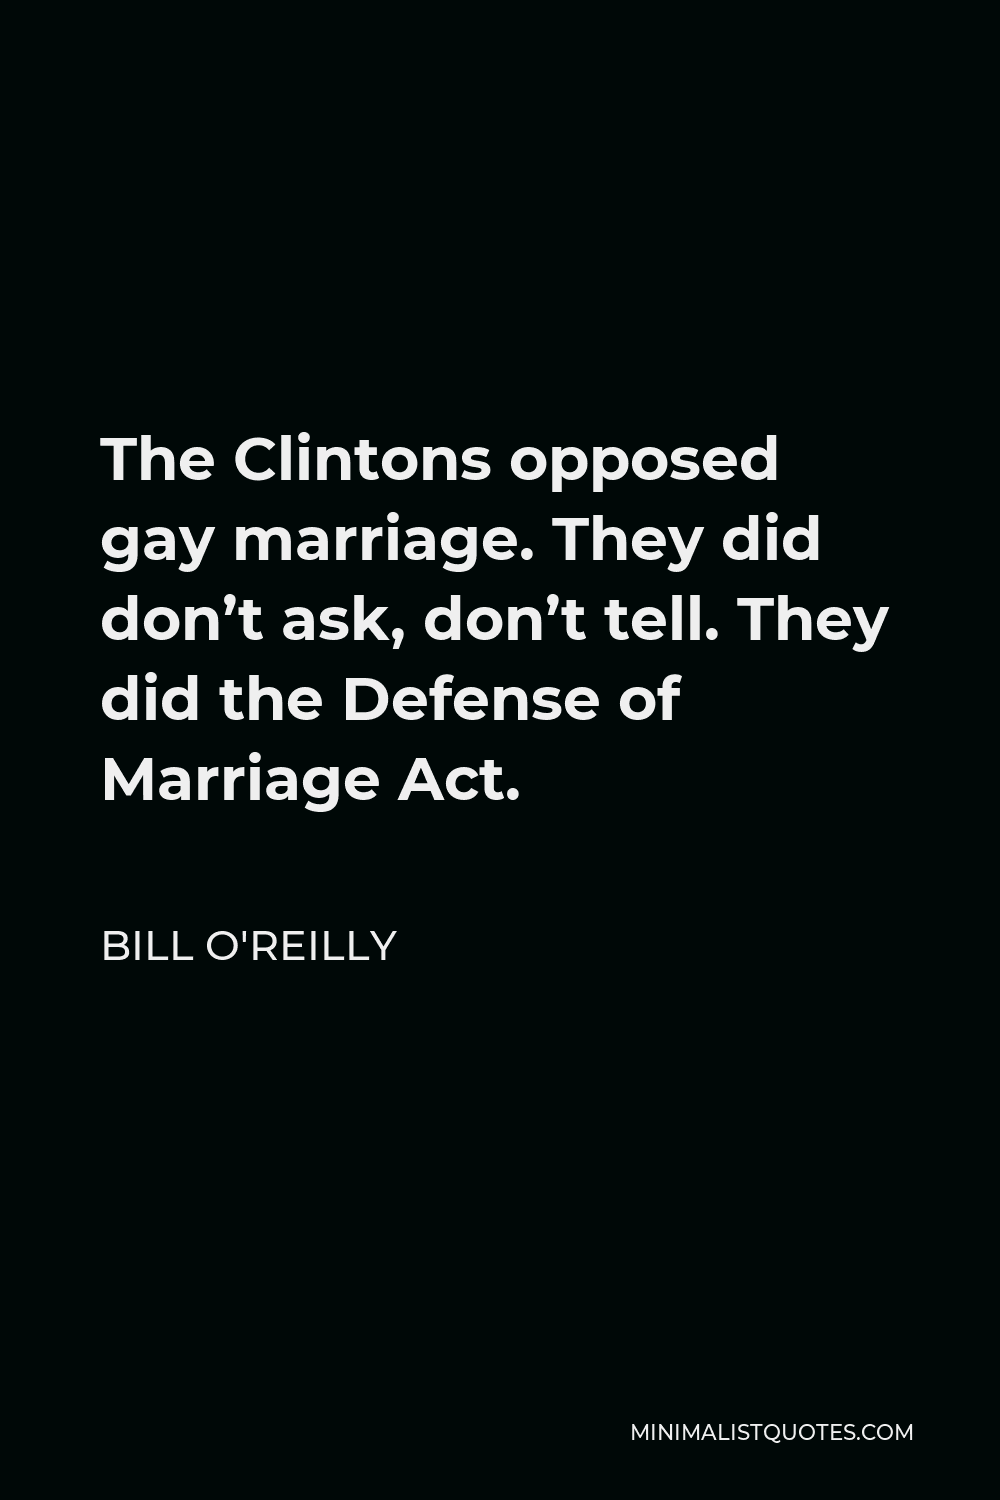 Bill O'Reilly Quote - The Clintons opposed gay marriage. They did don’t ask, don’t tell. They did the Defense of Marriage Act.